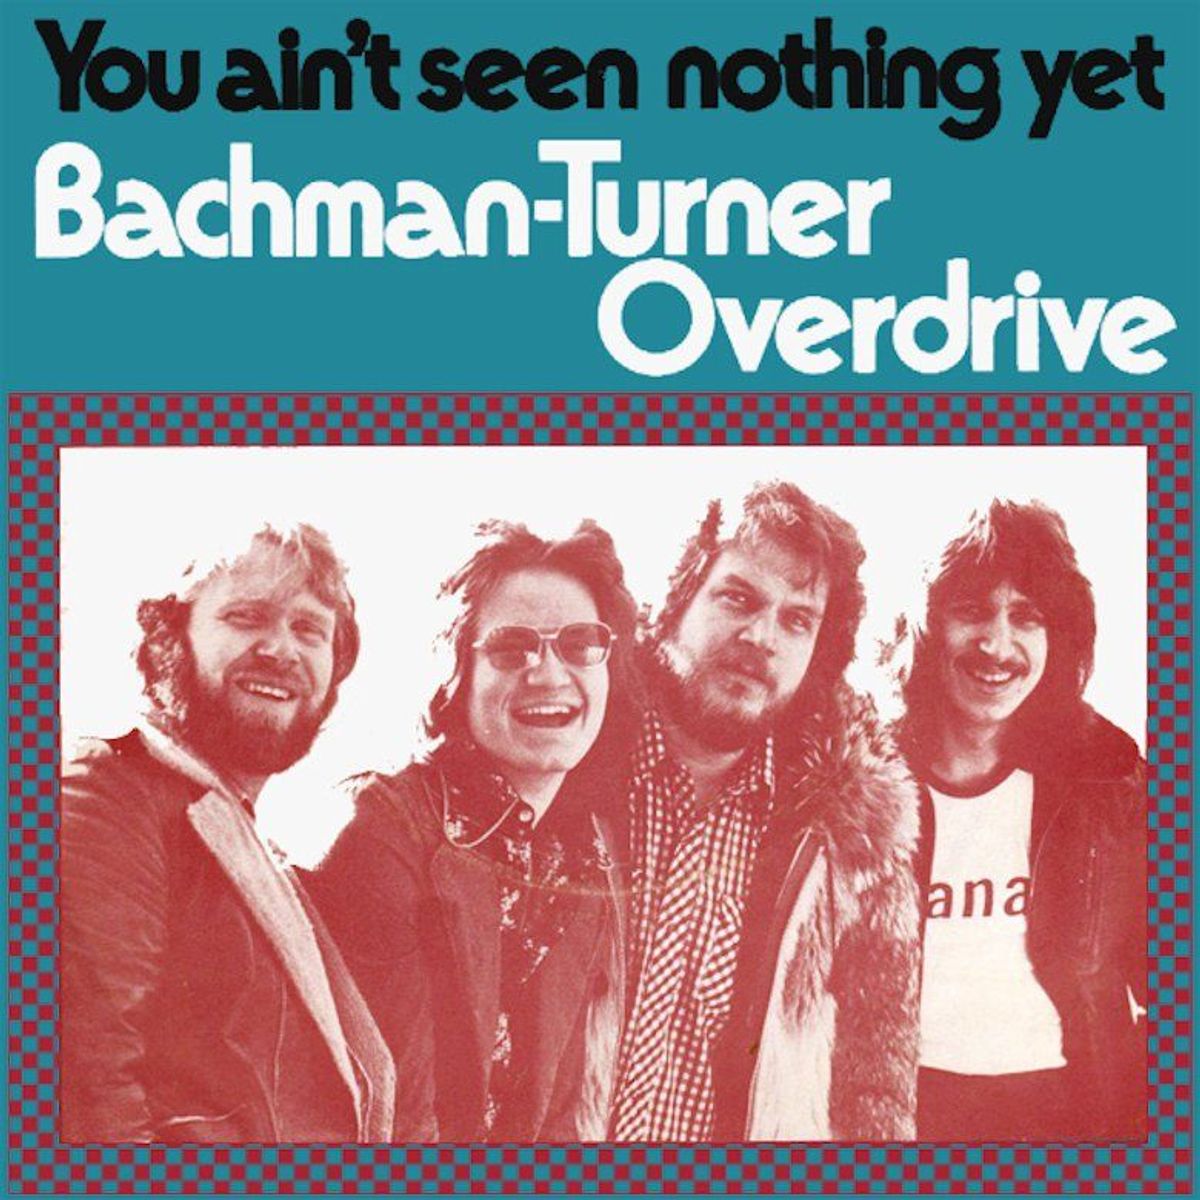 #Sttttotter - Bachman Turner Overdrive - You Ain’t Seen Nothin’ Yet (1974)